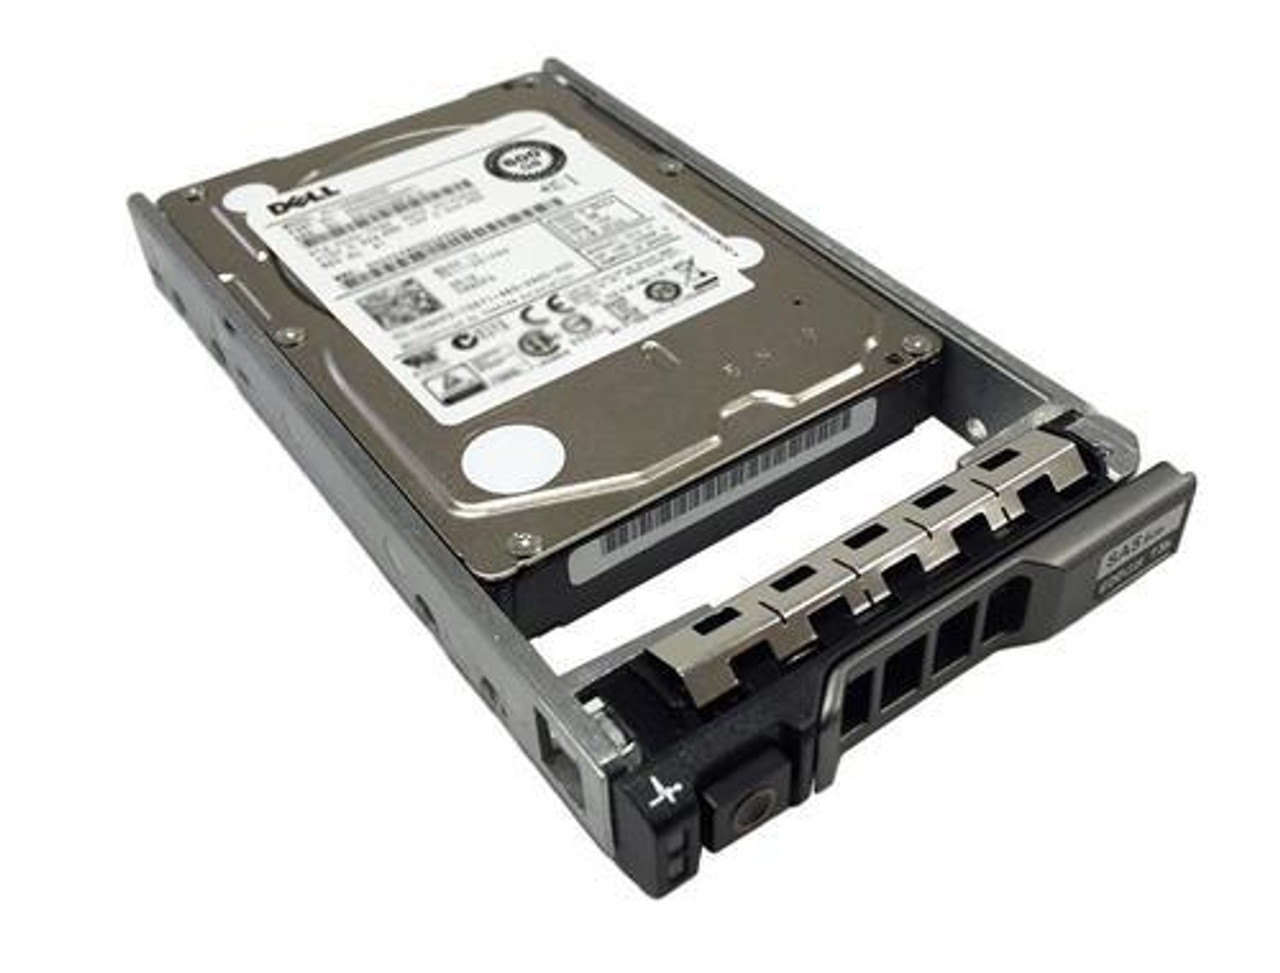 400-AHNR Dell 600GB 15000RPM SAS 12Gbps Hot Swap (SED) 2.5-inch Internal Hard Drive with Tray